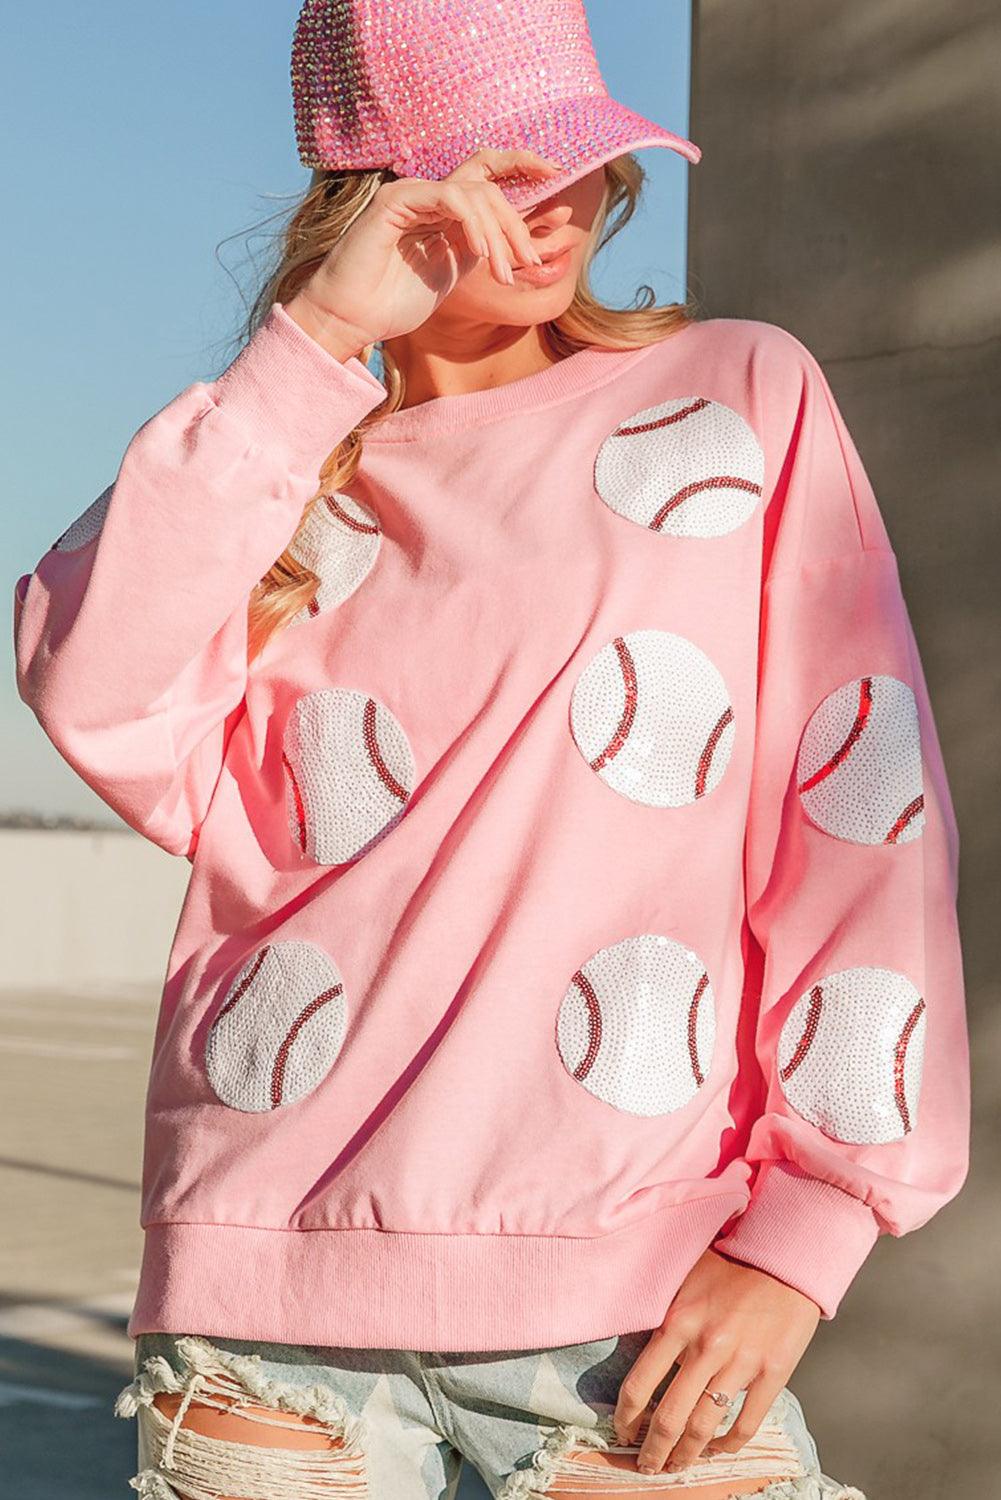 Pink Sequin Baseball Patched Pullover Sweatshirt - L & M Kee, LLC